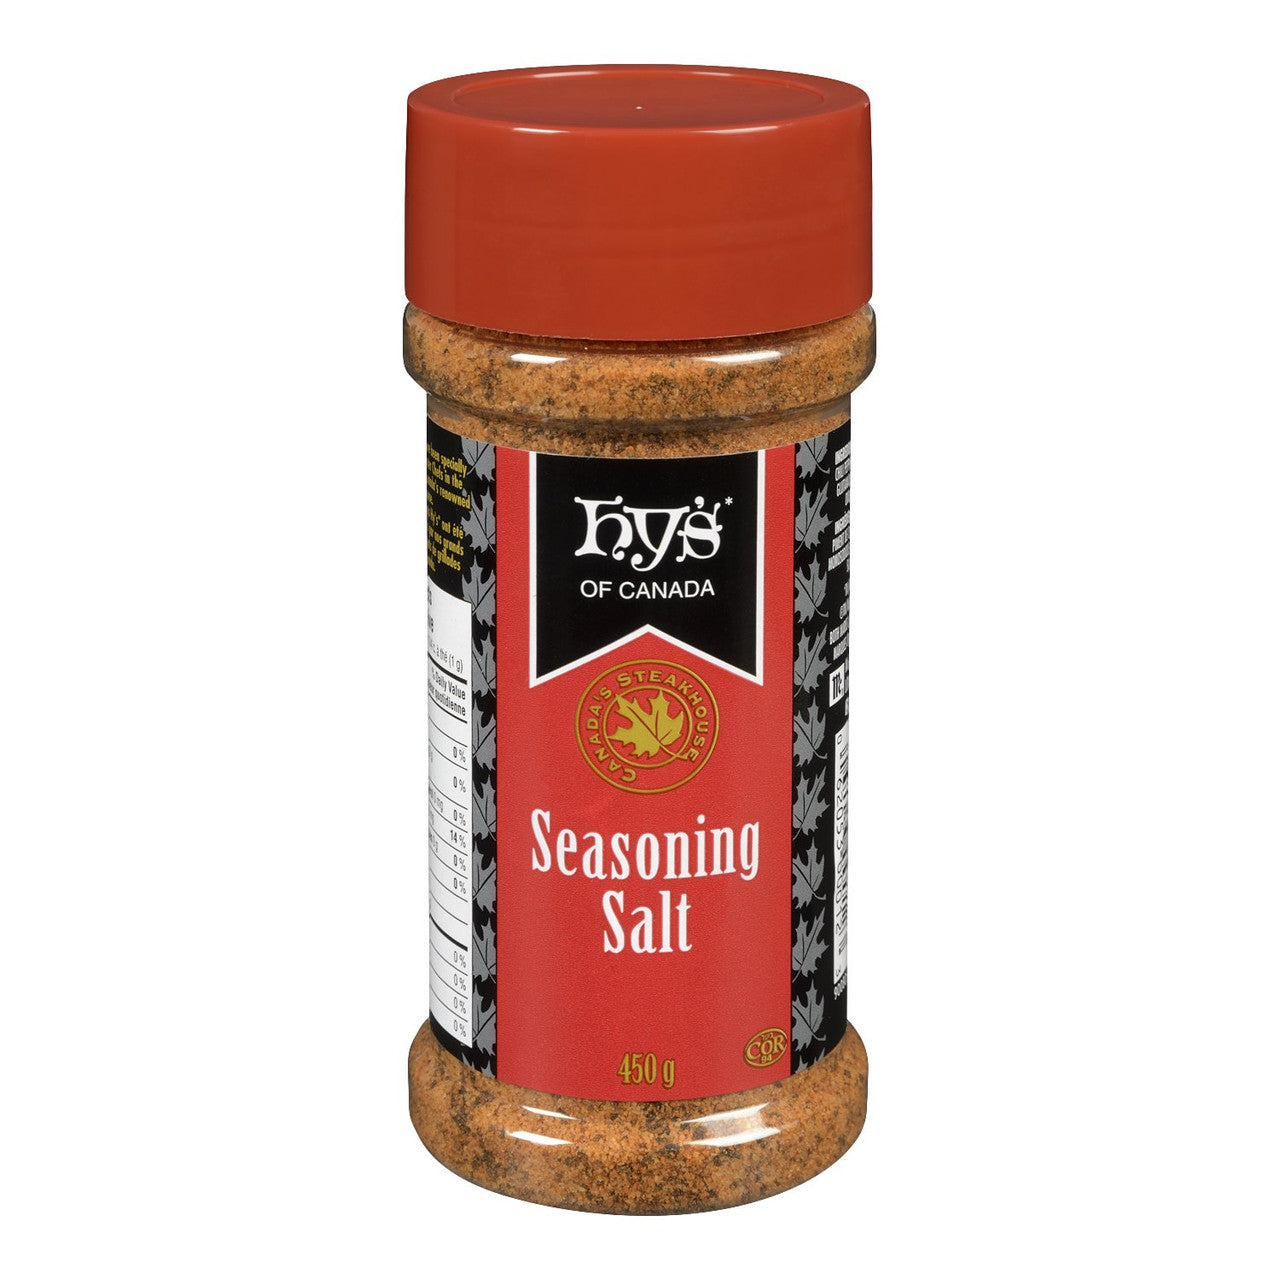 Hy's Seasoning Salt - 450g/15.9 oz. {Imported from Canada}